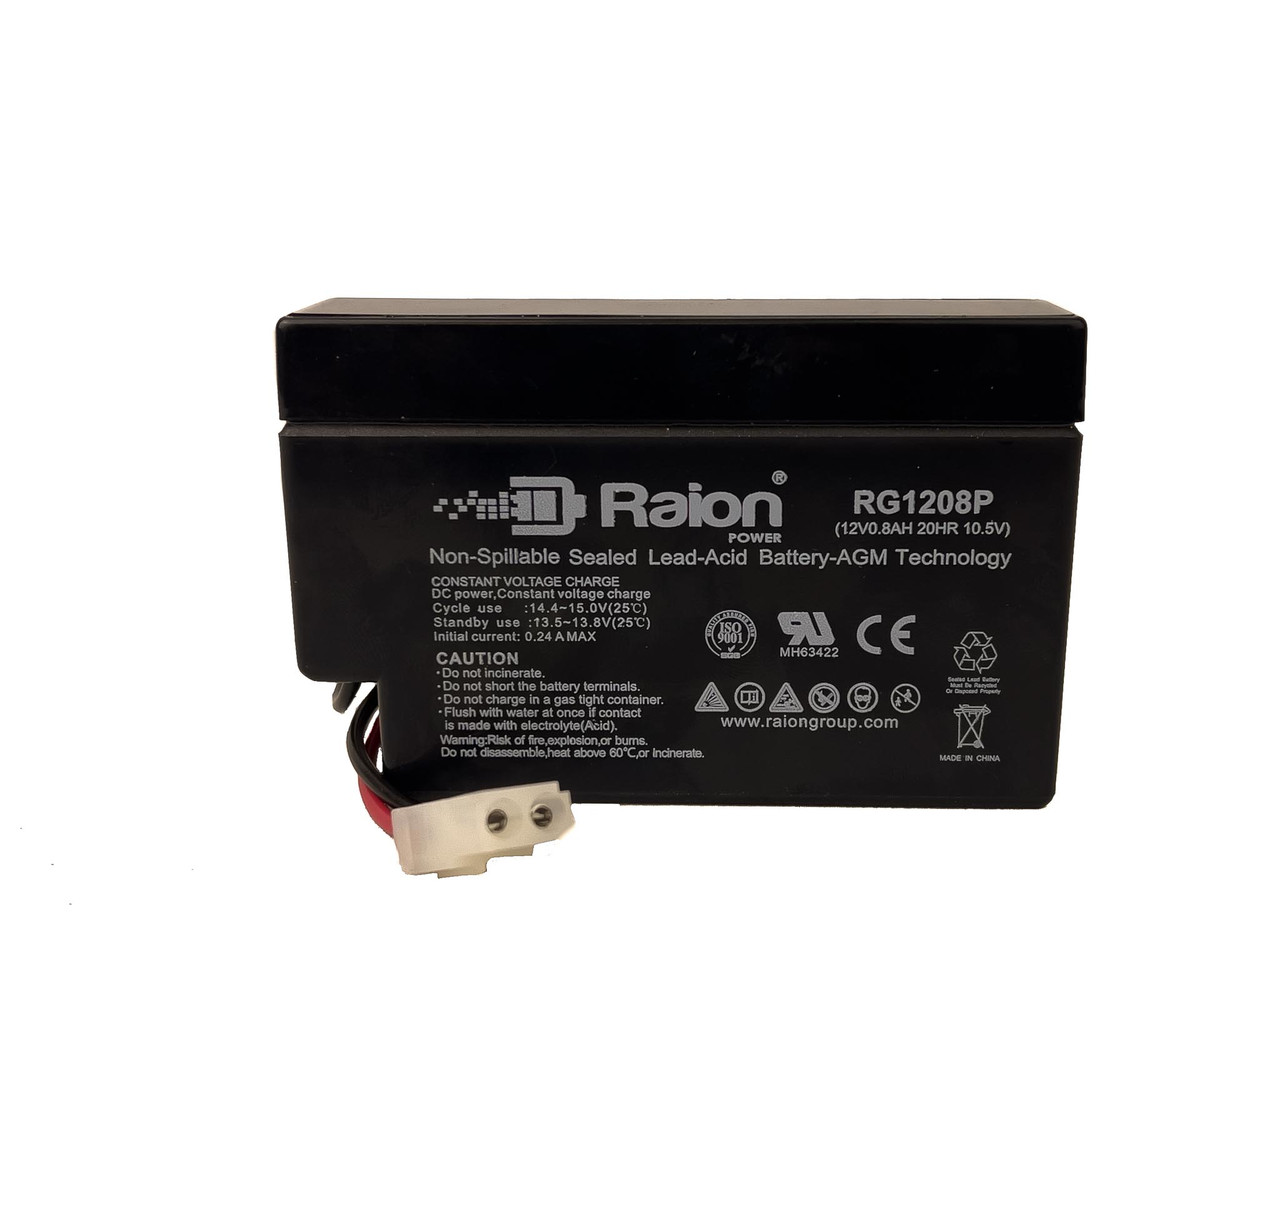 Raion Power 12V 0.8Ah SLA Battery With T1 Terminals For AlarmNet 7845C